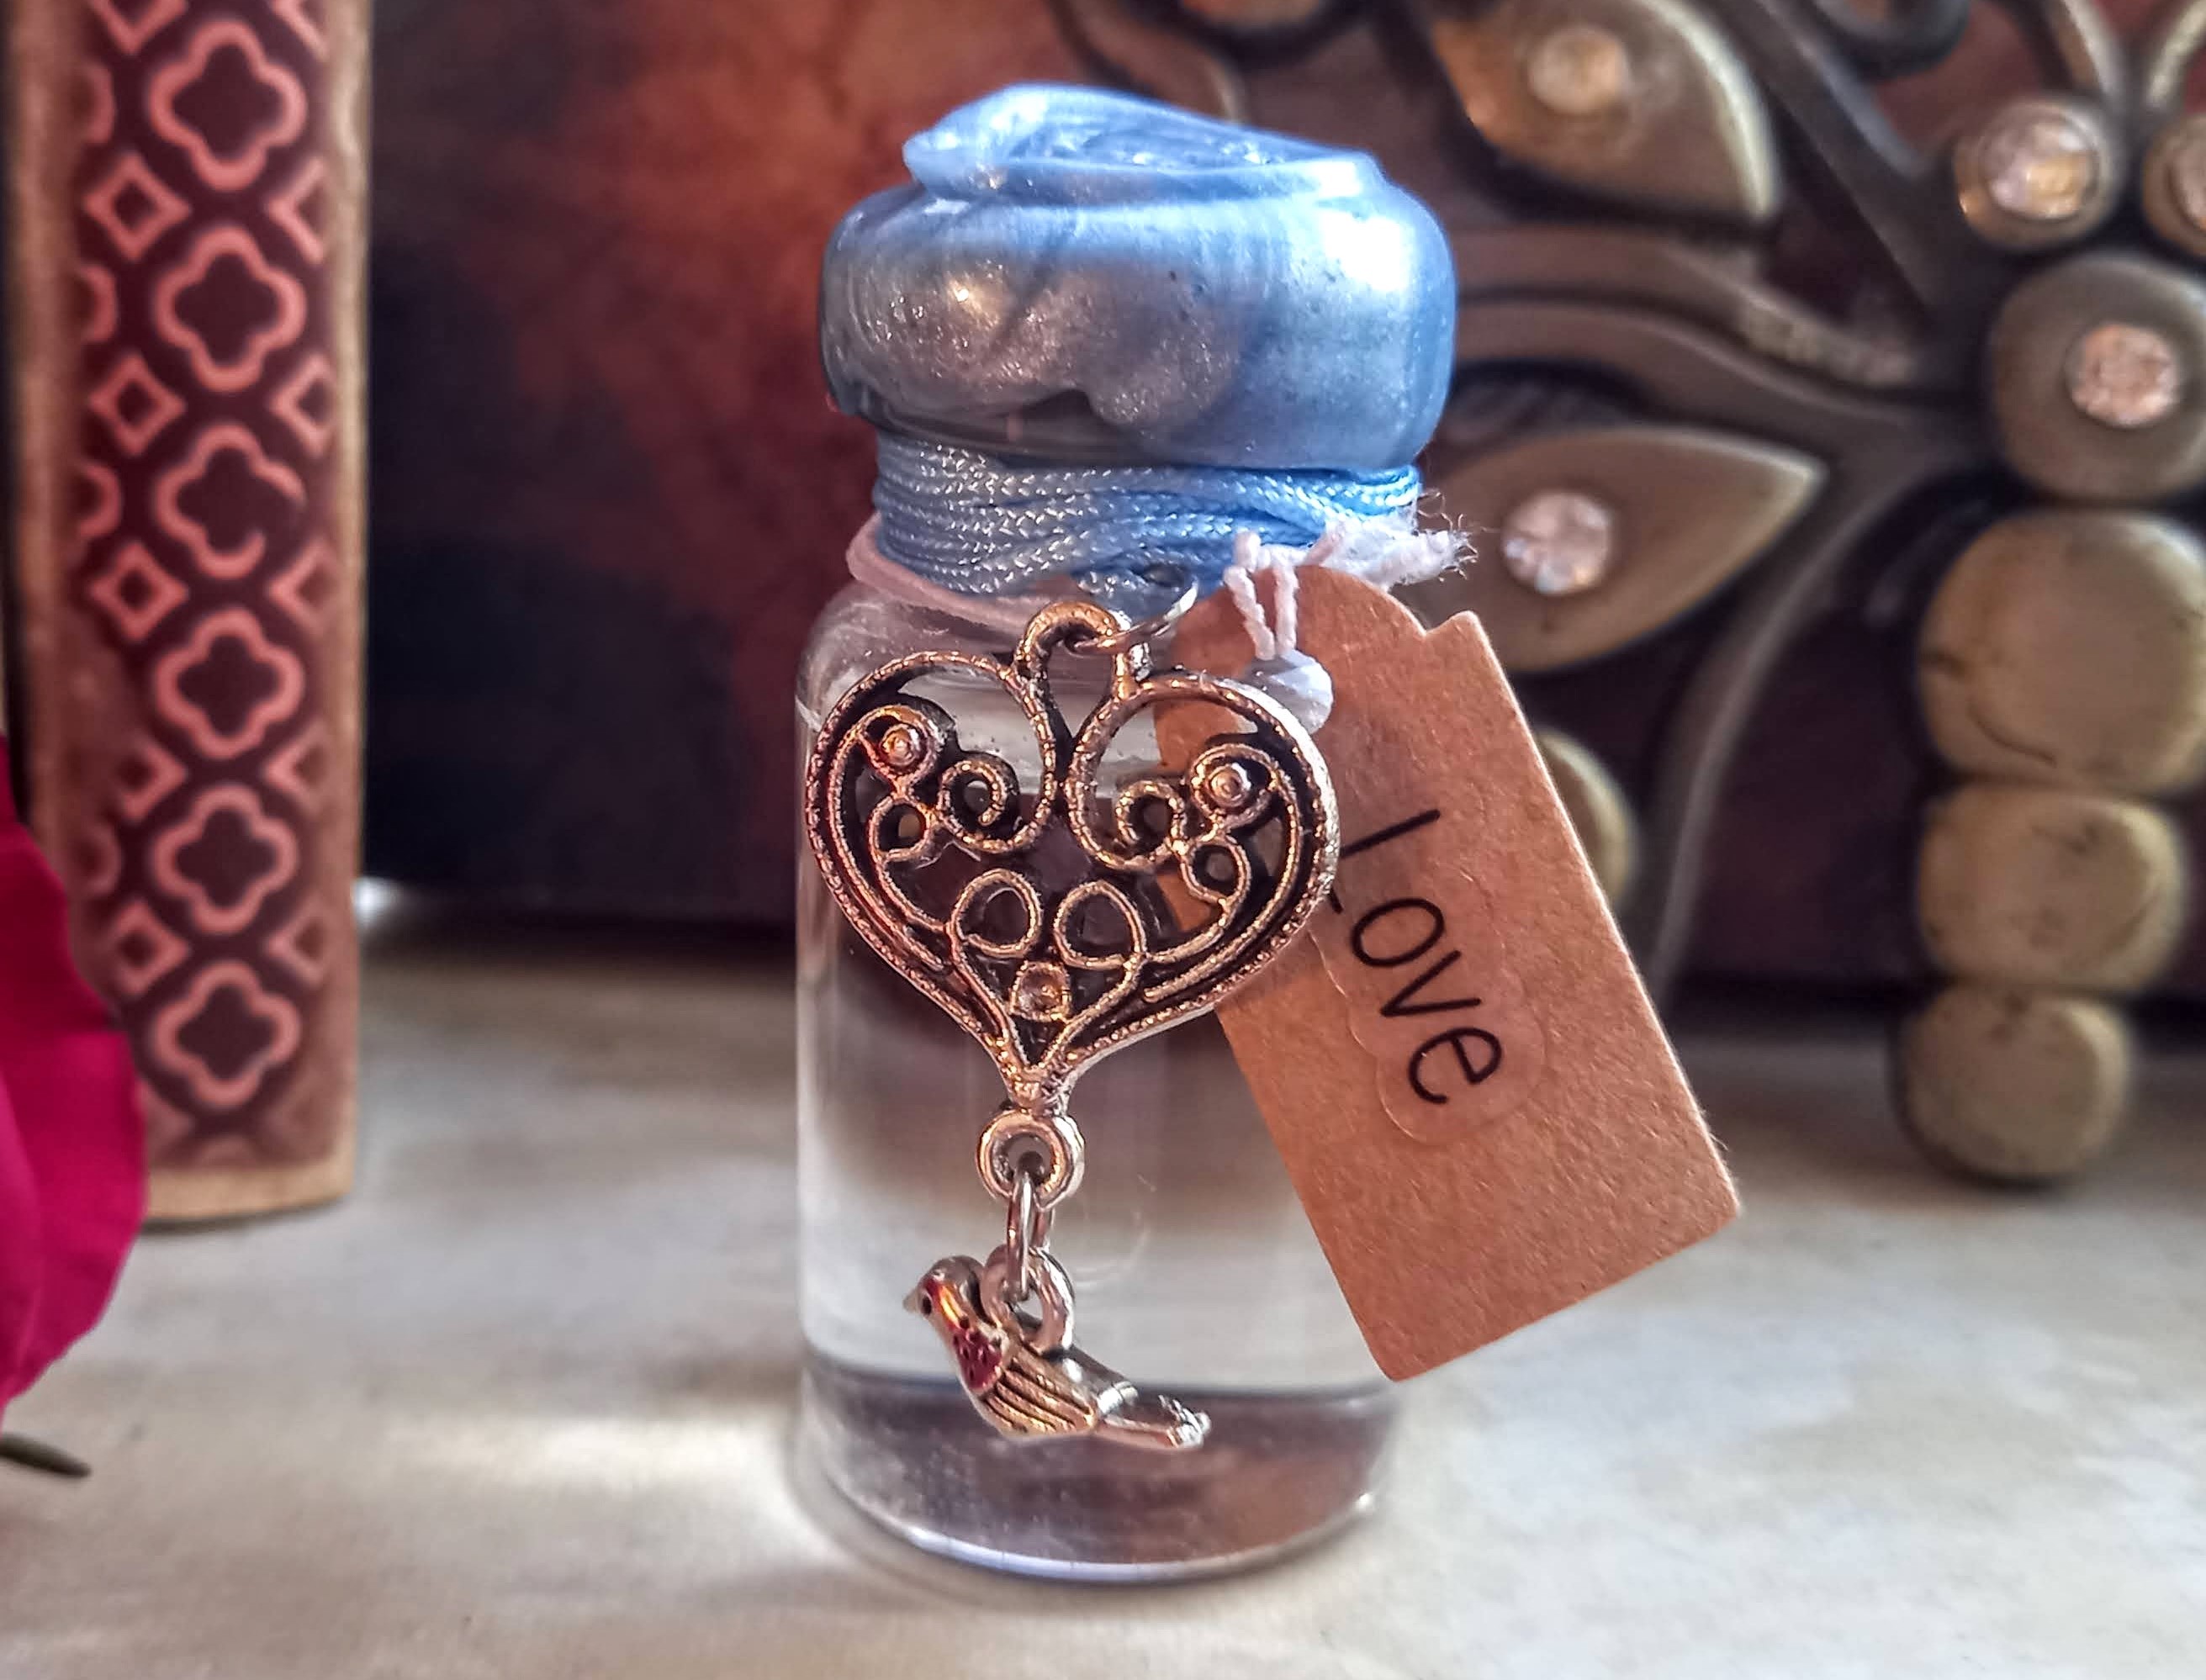 VIAL* Freedom and Friendship - Charmed Vial filled with St.Brigid Well Water from an Irish Holy Well